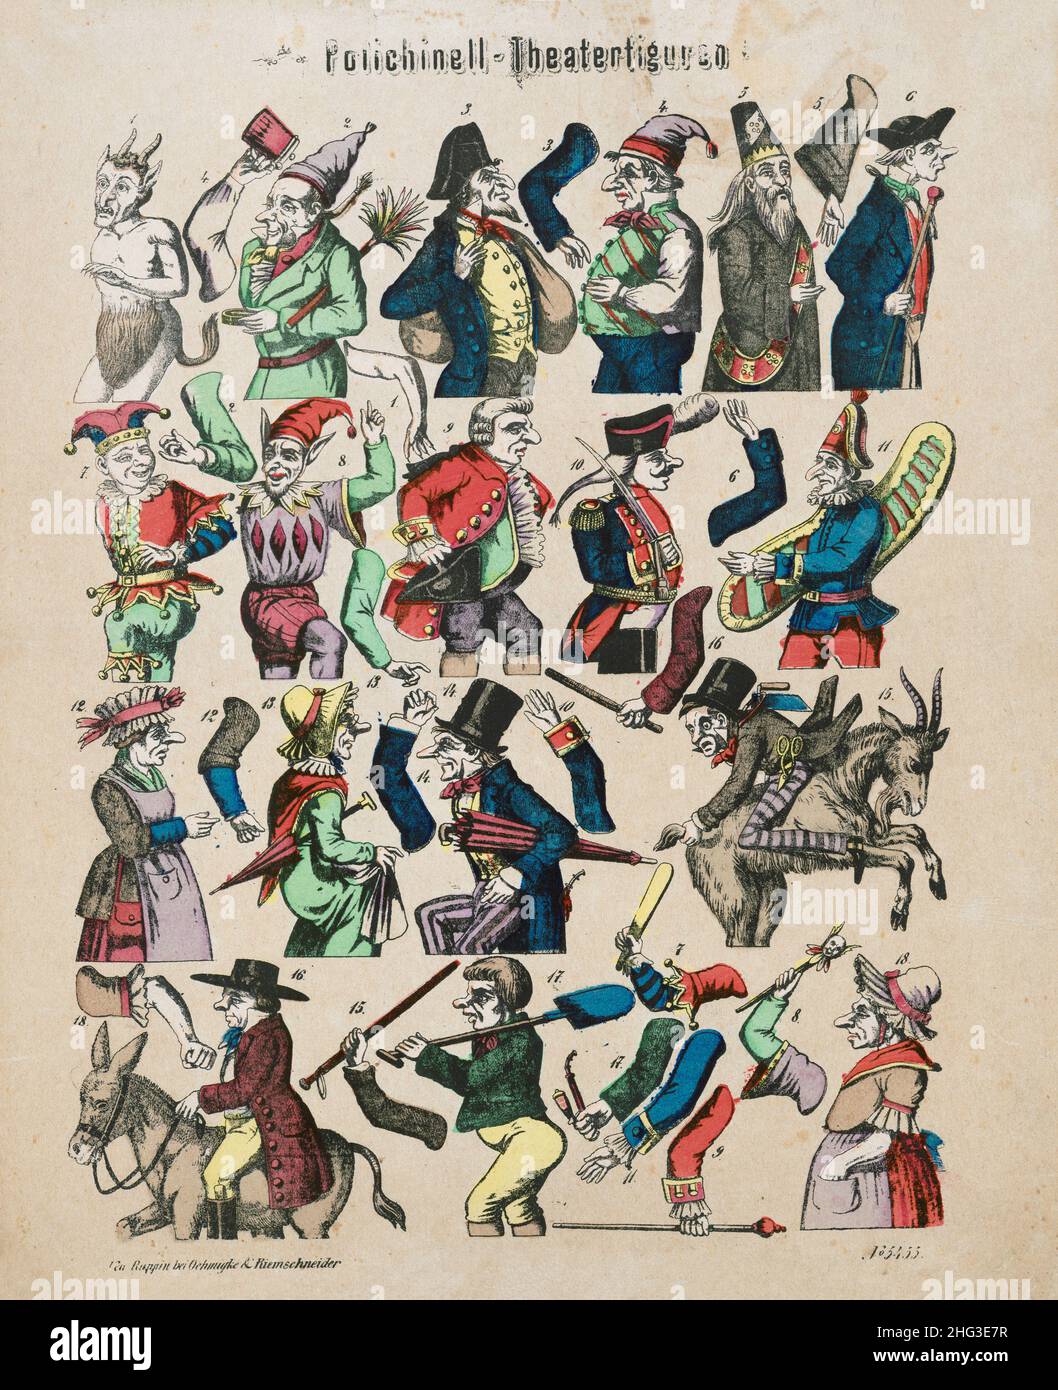 Vintage colour illustration of Polichinell Theatrical figures for cutting. 1880 Polichinelle is a character of the French folk theater: a hunchback, a Stock Photo